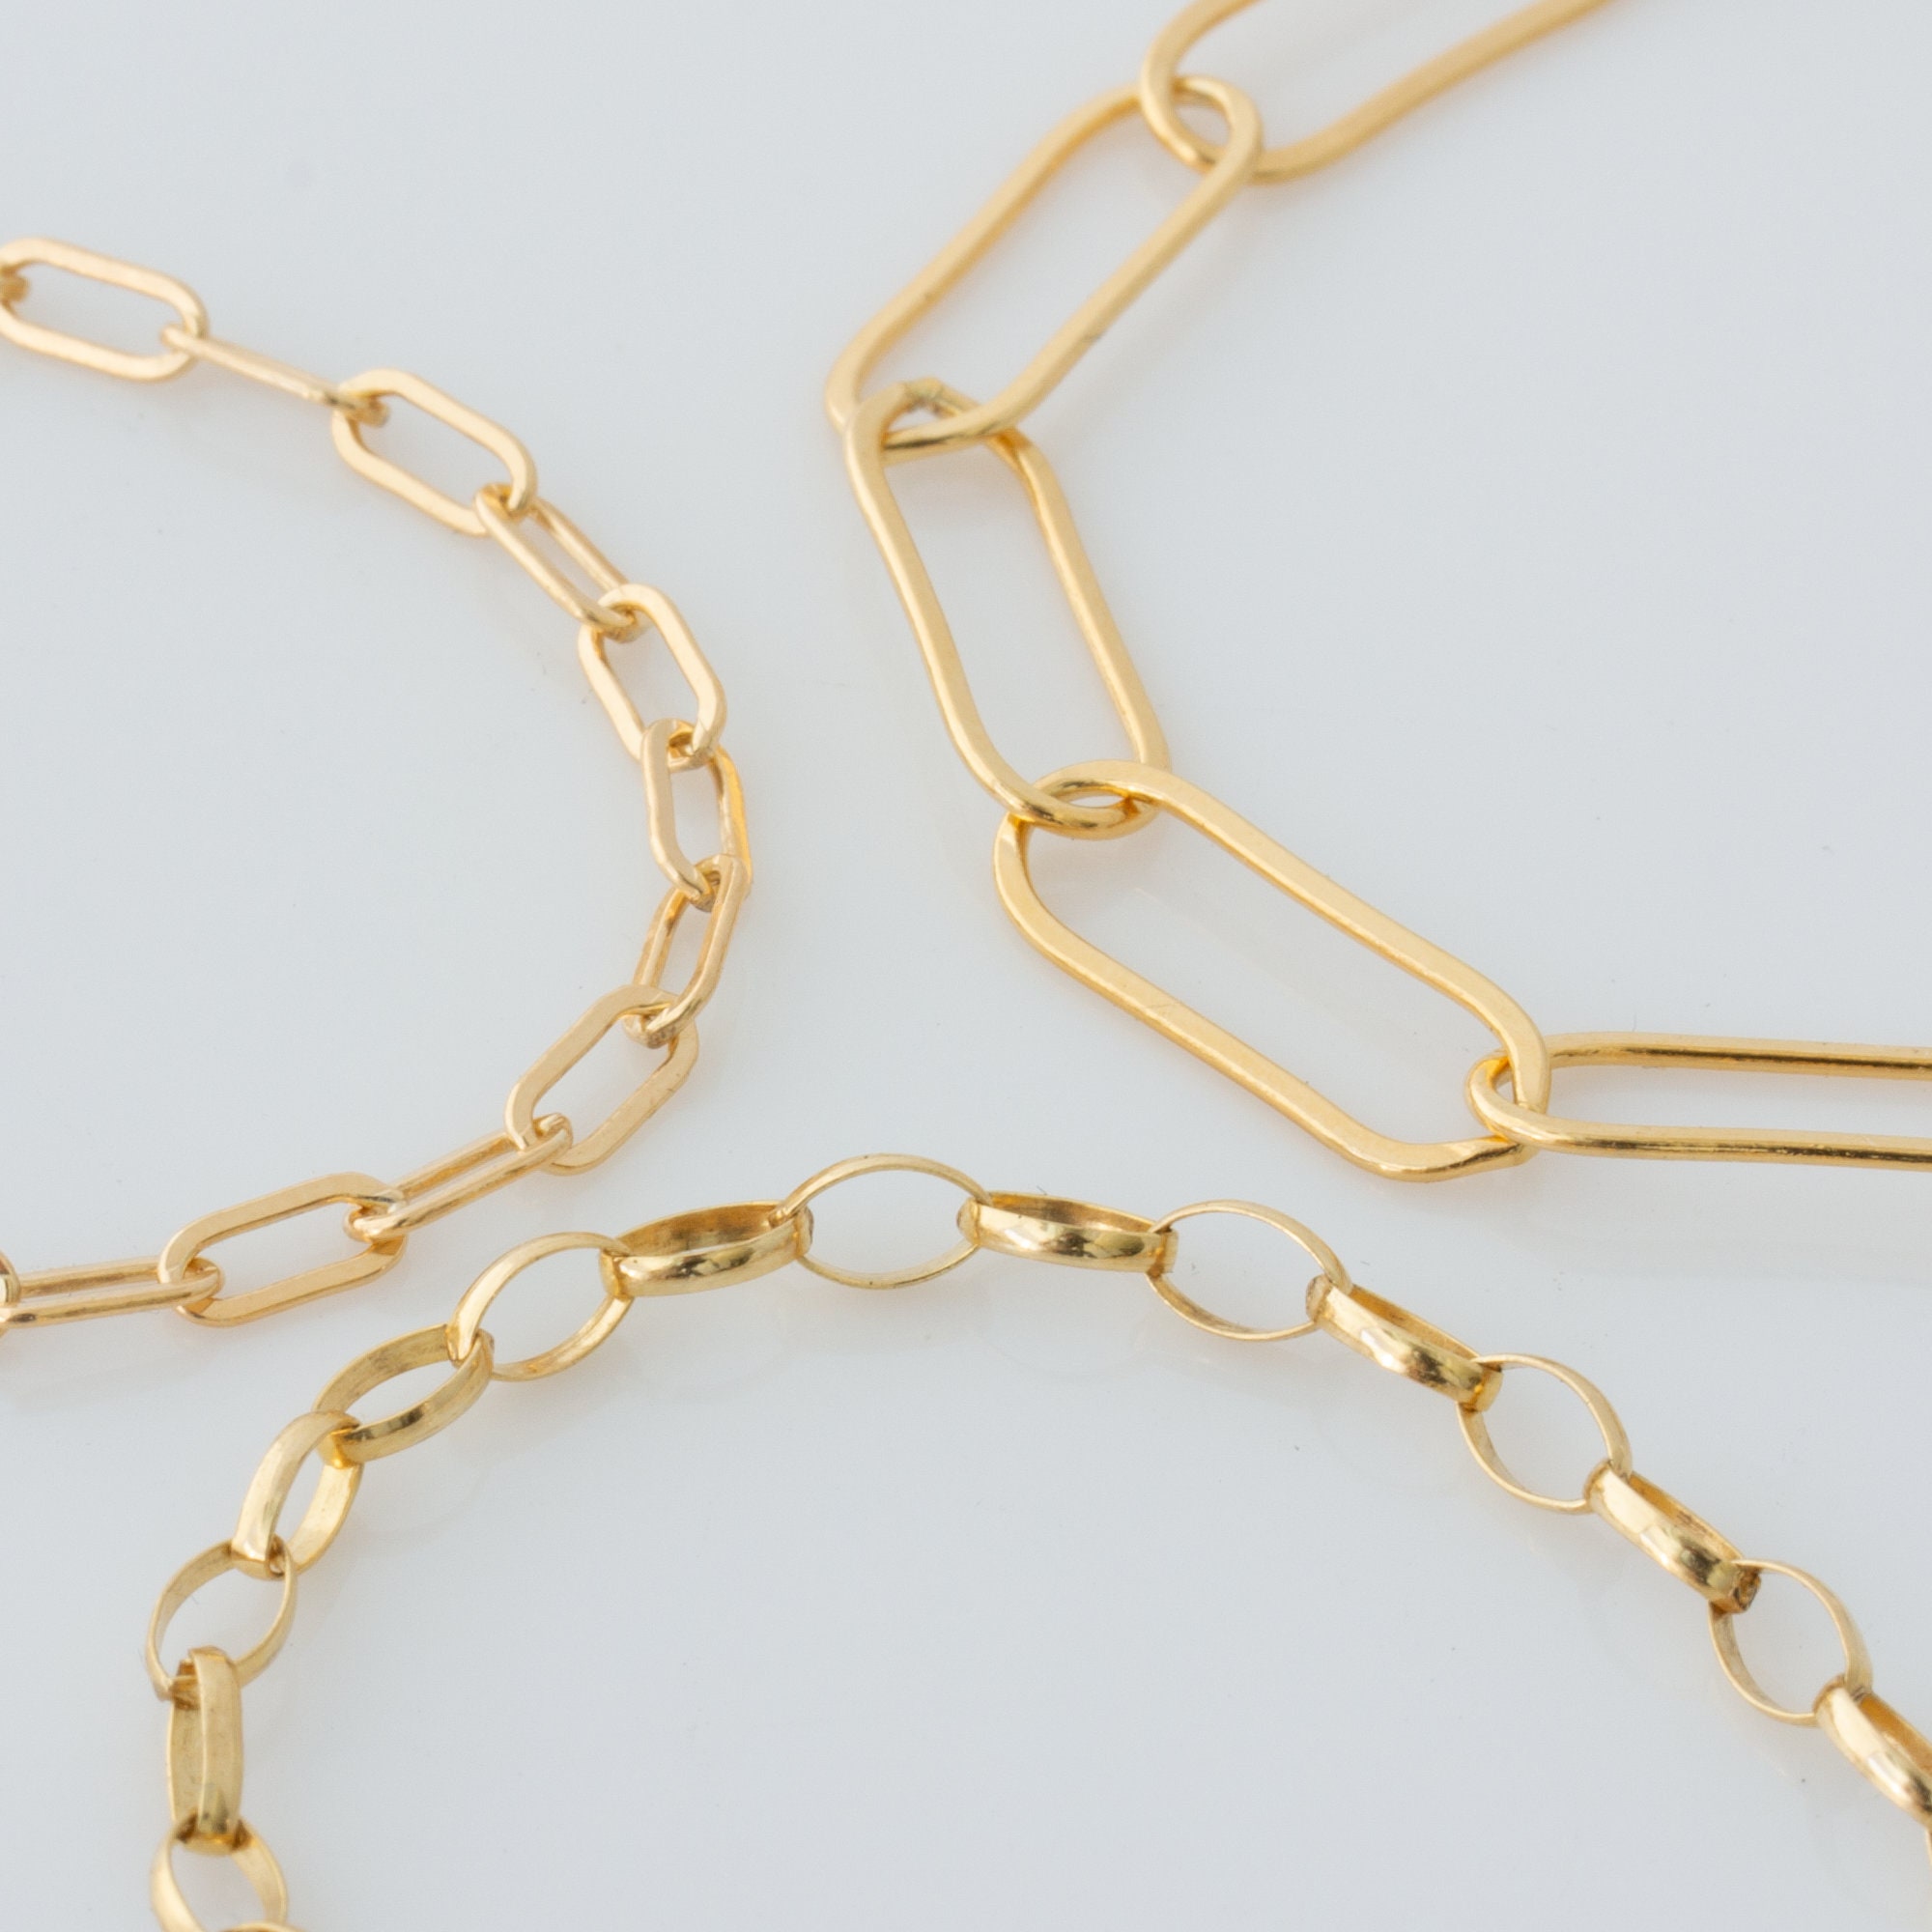 Large Paperclip Chain Bracelet in 18k Yellow Gold Vermeil